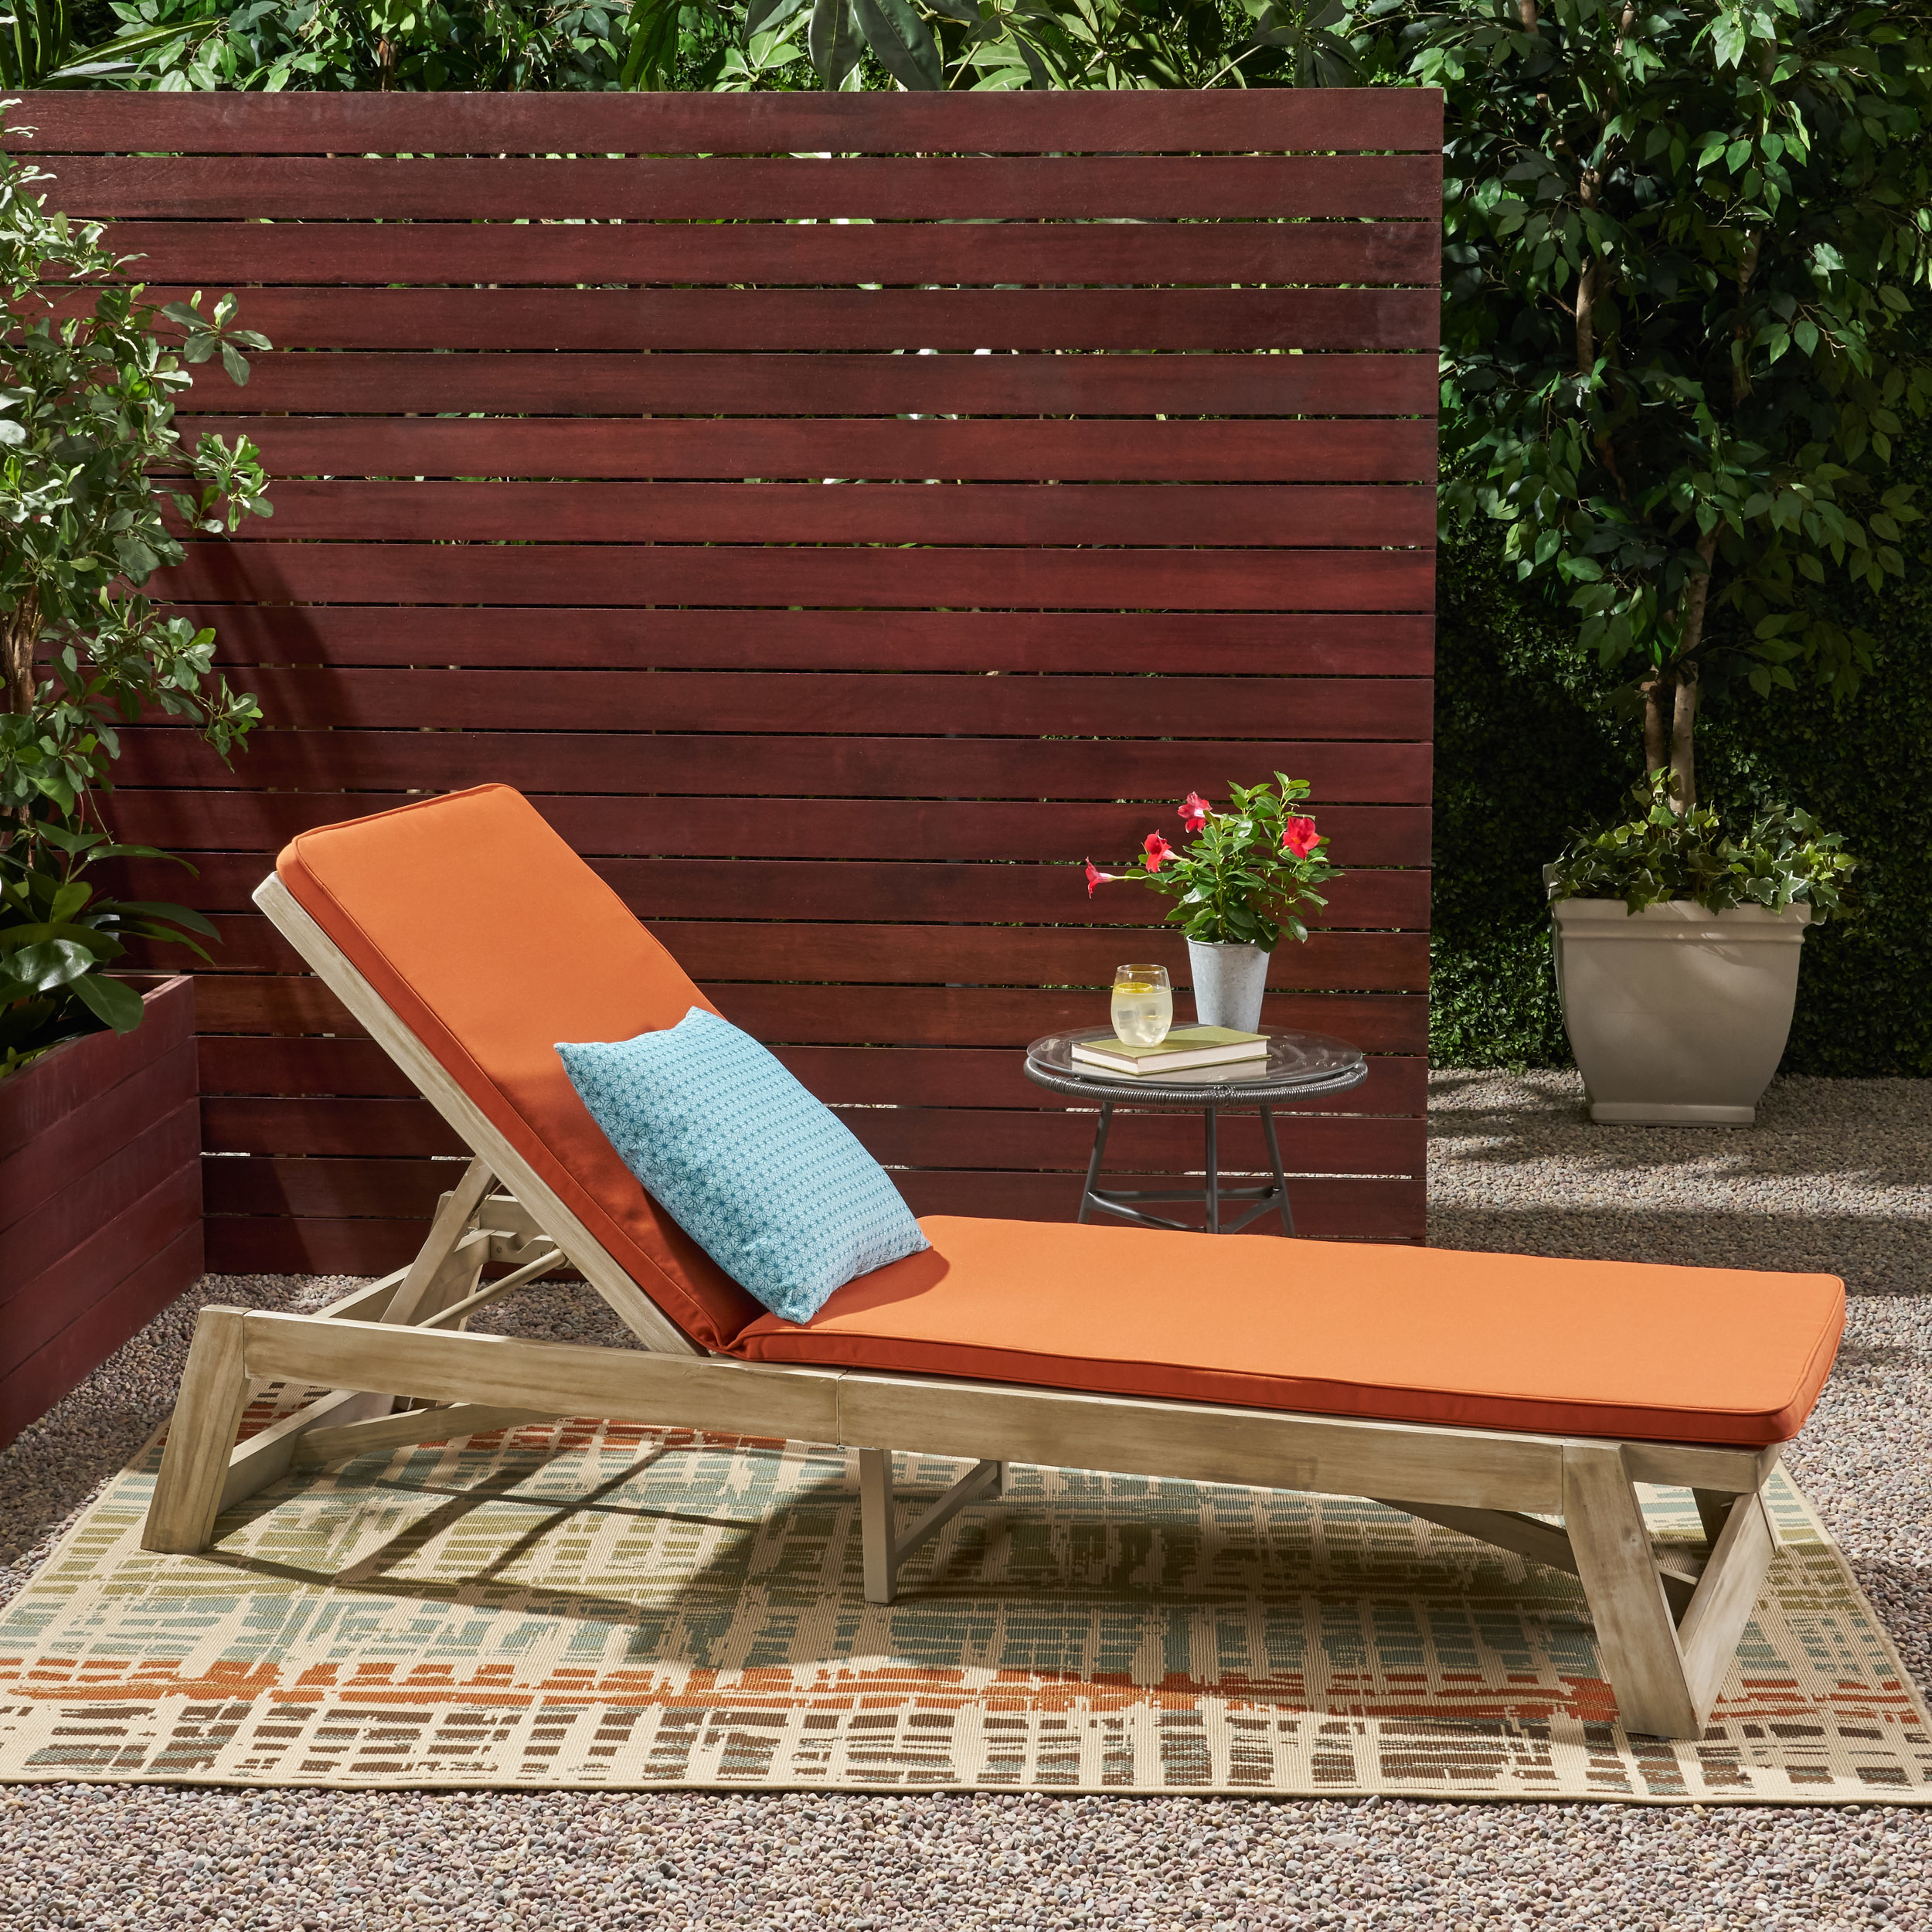 Adelaide Outdoor Acacia Wood Chaise Lounge And Cushion Set - Light Gray Wash, Gray, Rust Orange